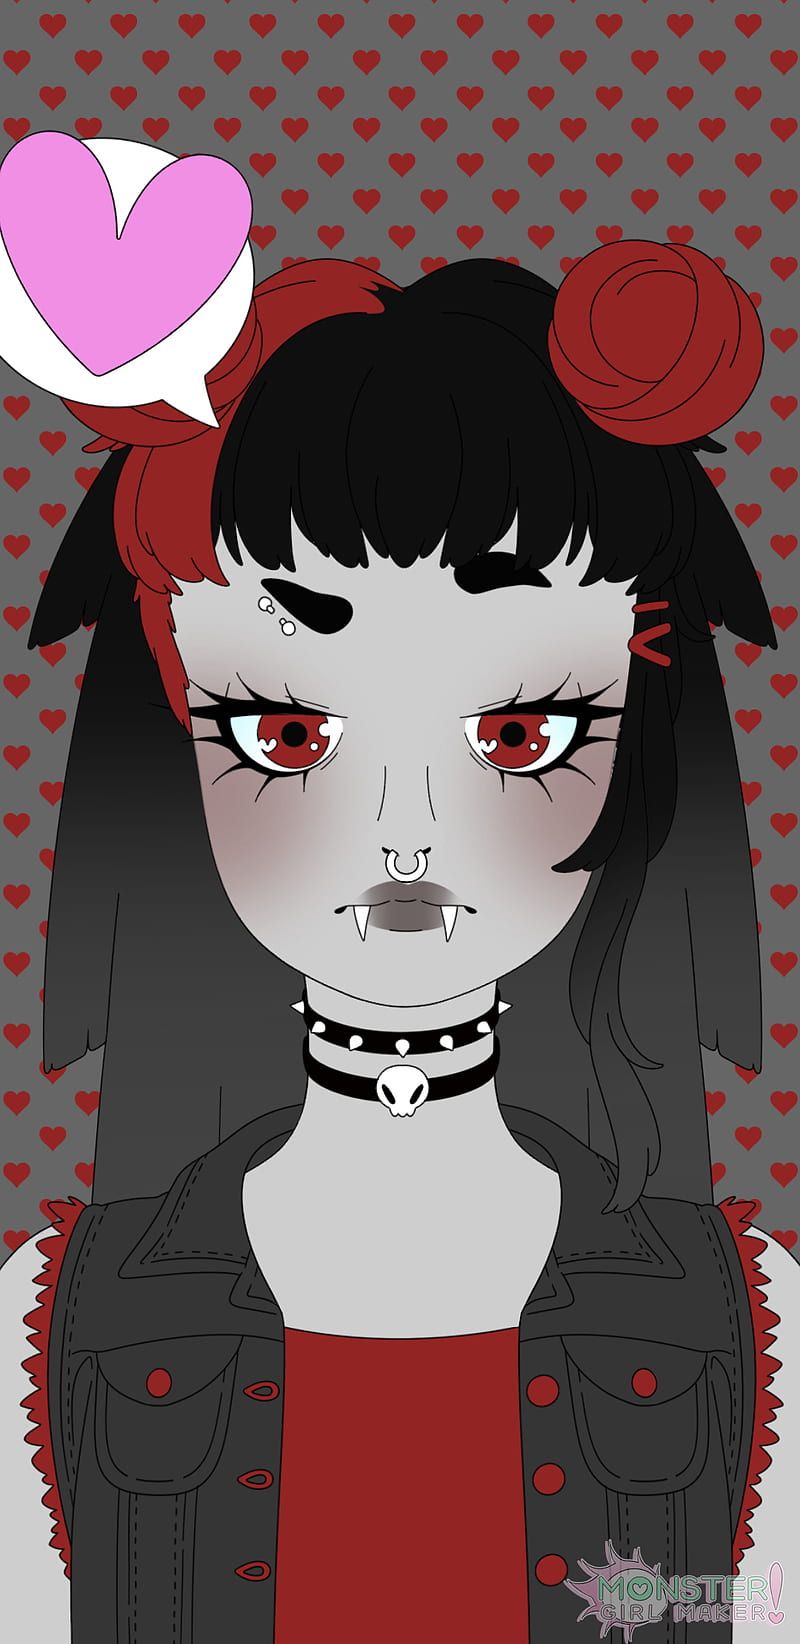 A red-haired goth girl with black hair and red eyes, wearing a black jacket and a red dress. She has a red bow in her hair and a heart in a speech bubble above her head. - Vampire